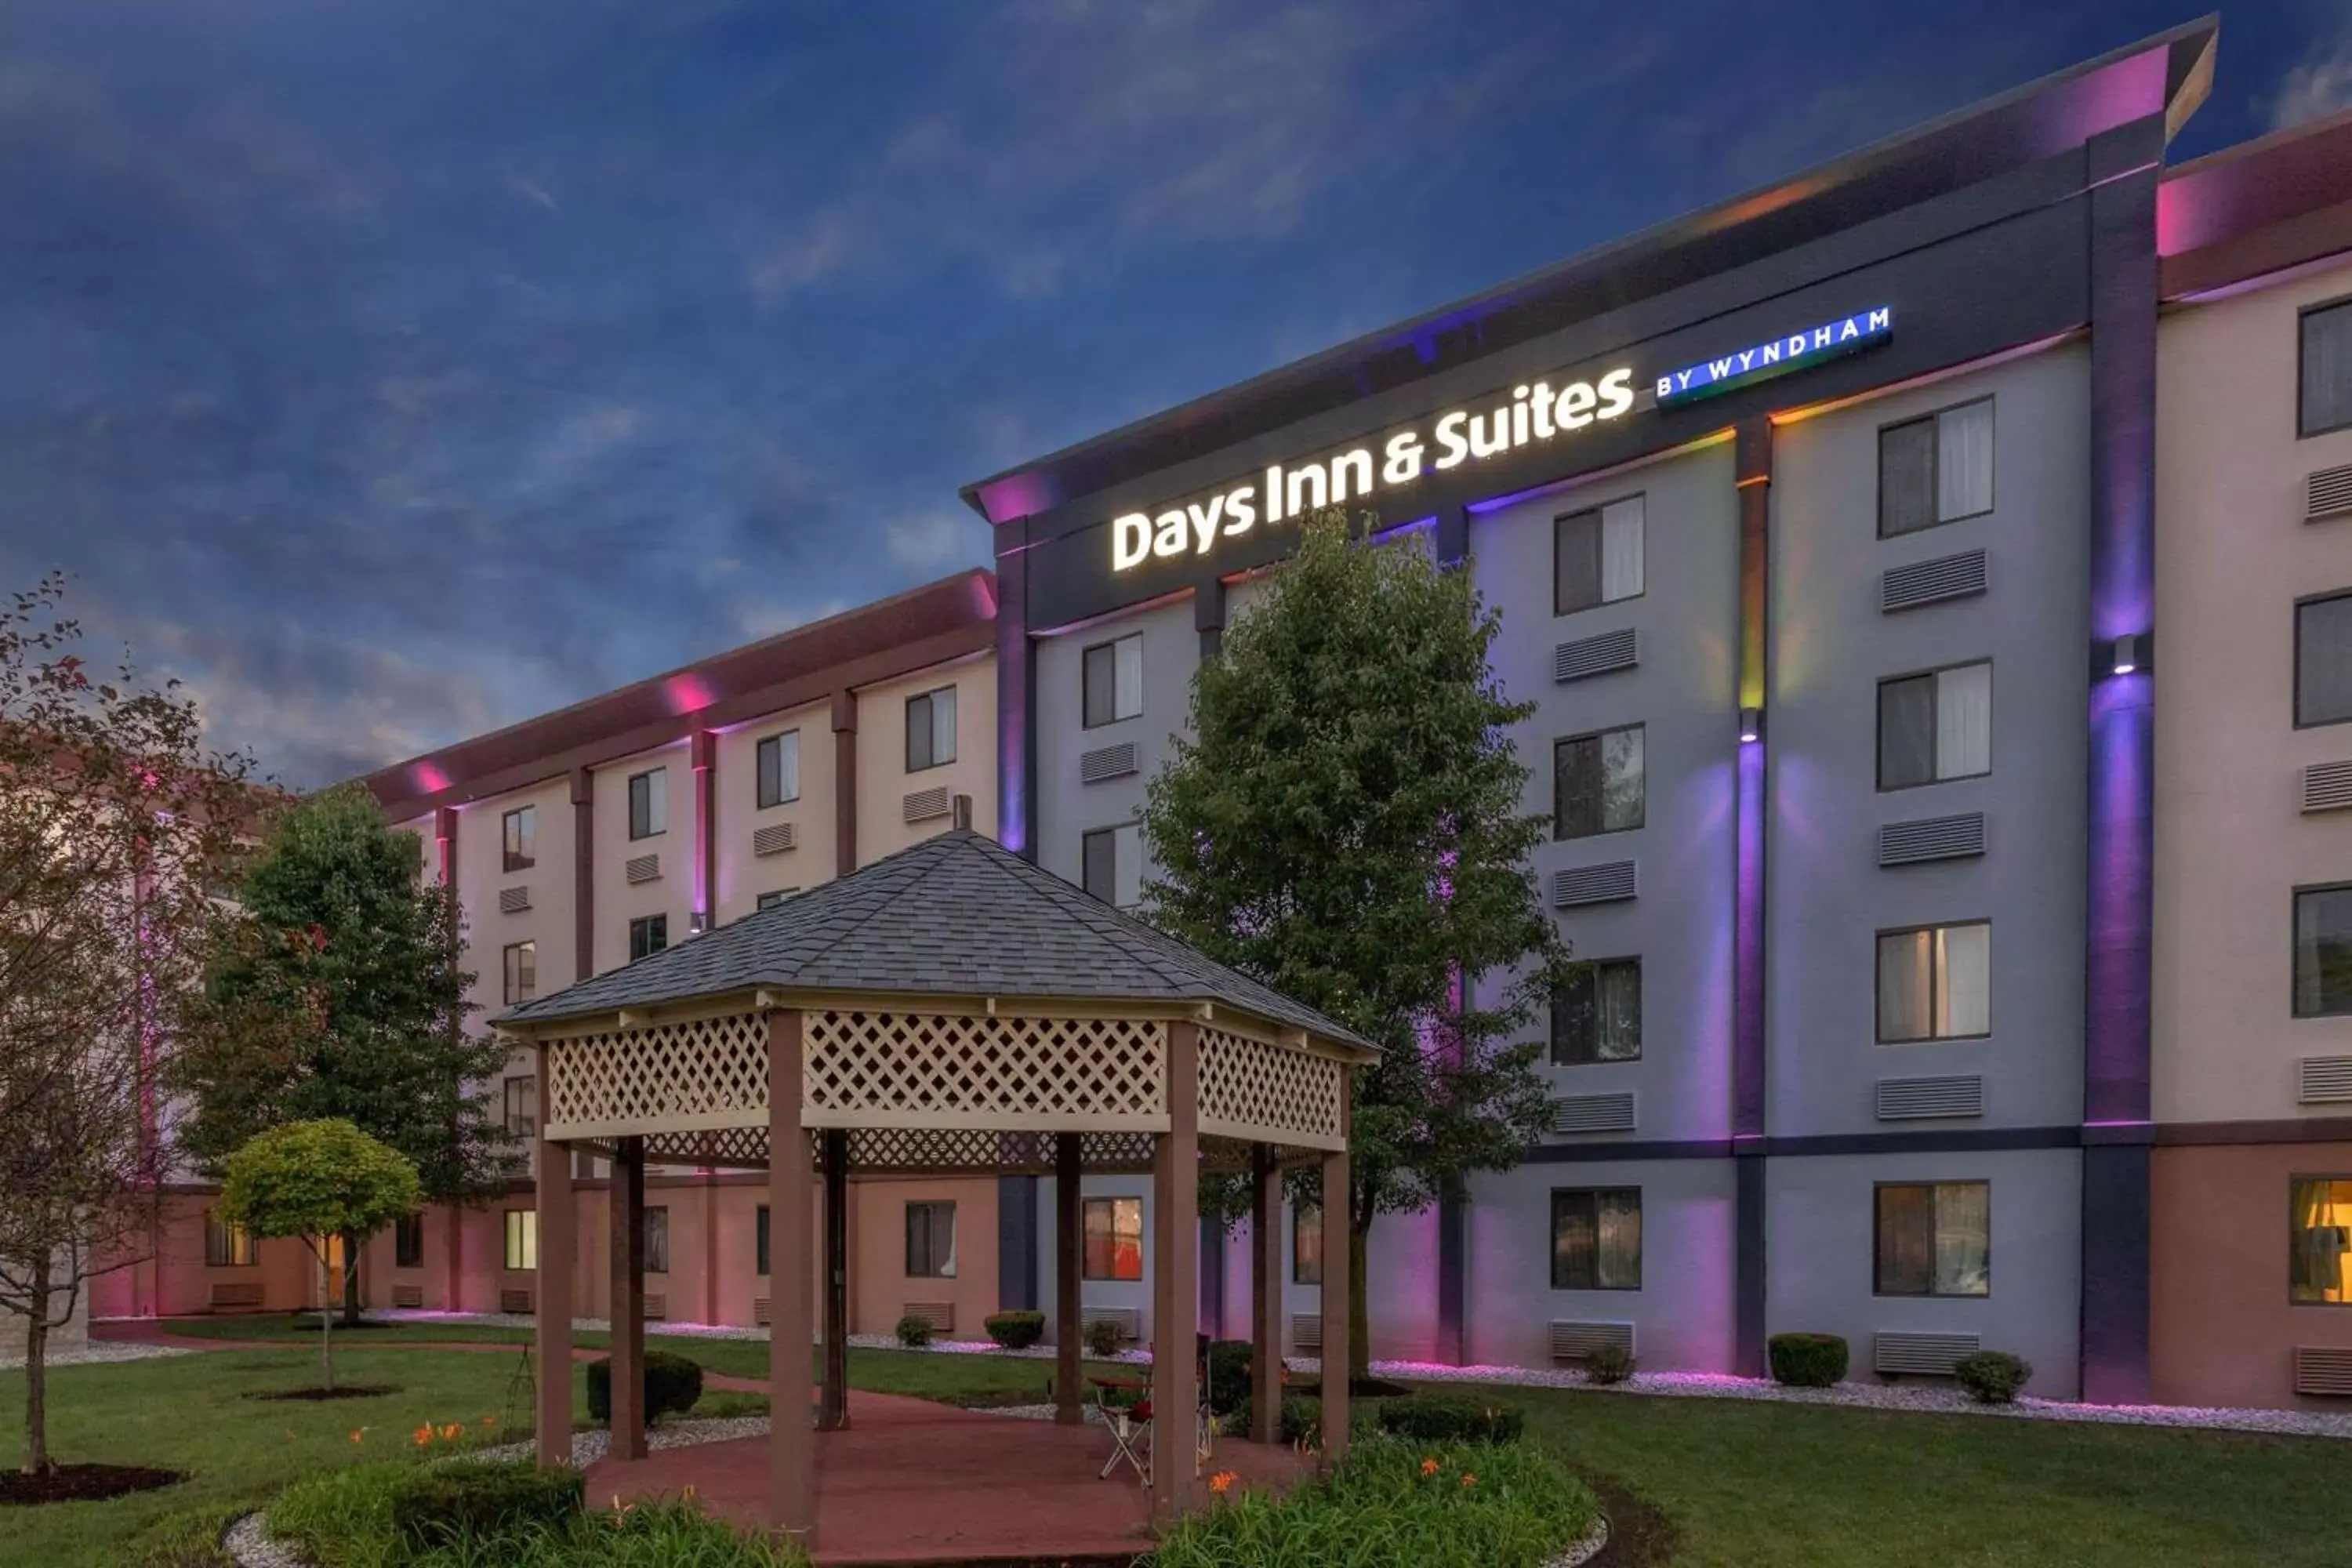 Property Building in Days Inn and Suites by Wyndham Hammond, IN